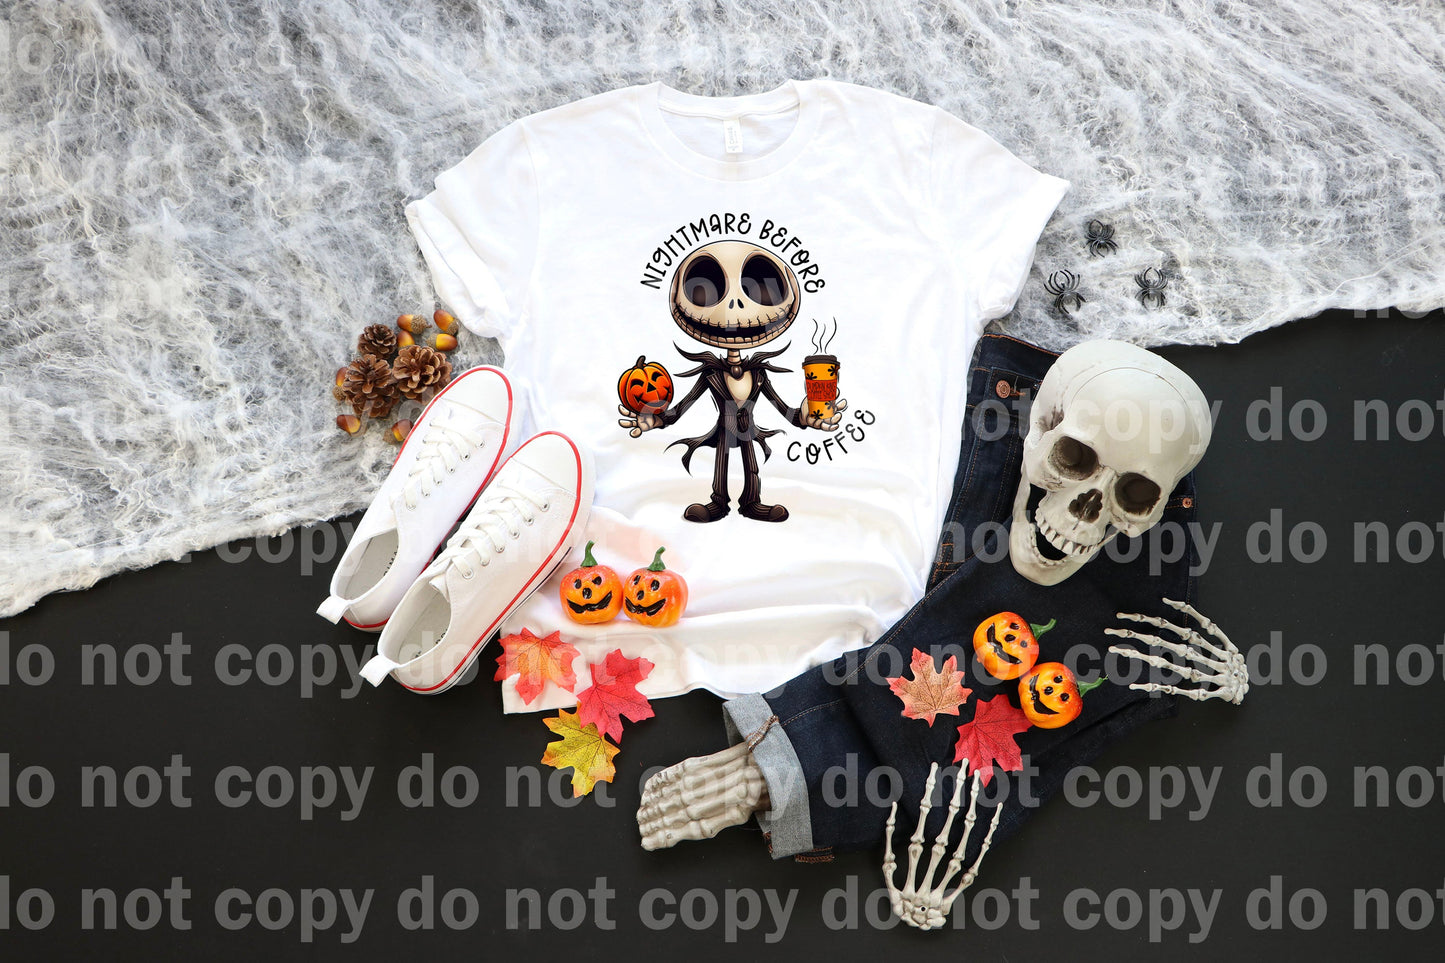 Nightmare Before Coffee Dream Print or Sublimation Print